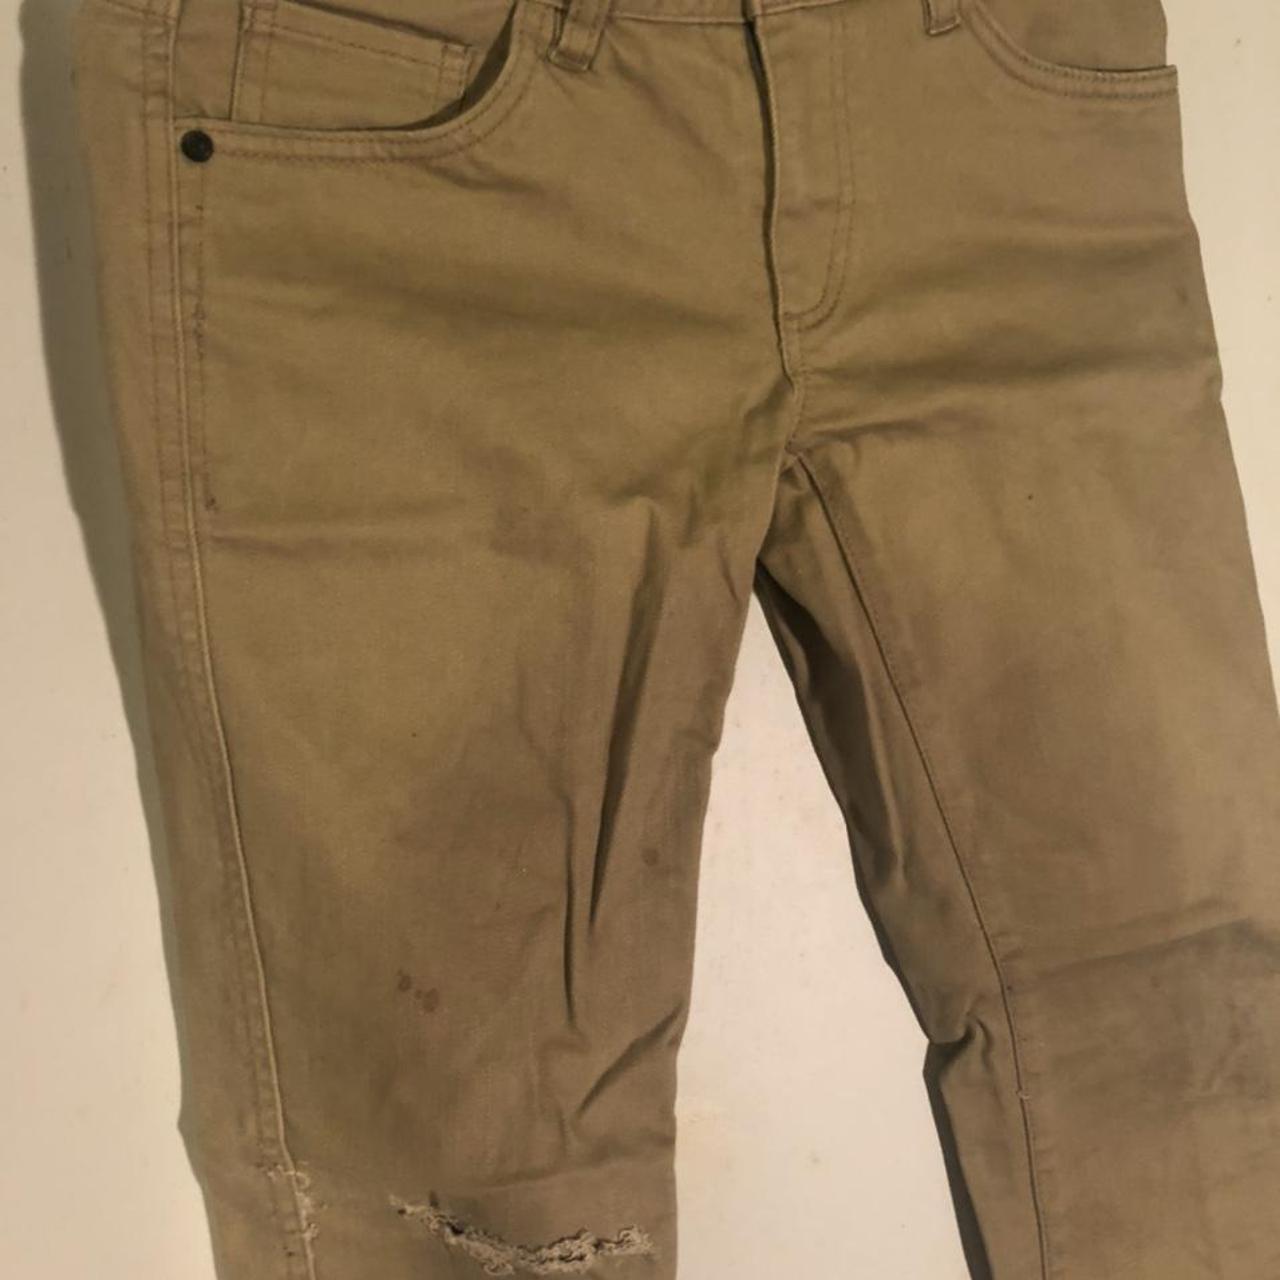 Product Image 2 - -Rips from manufacturers 
-Worn (not